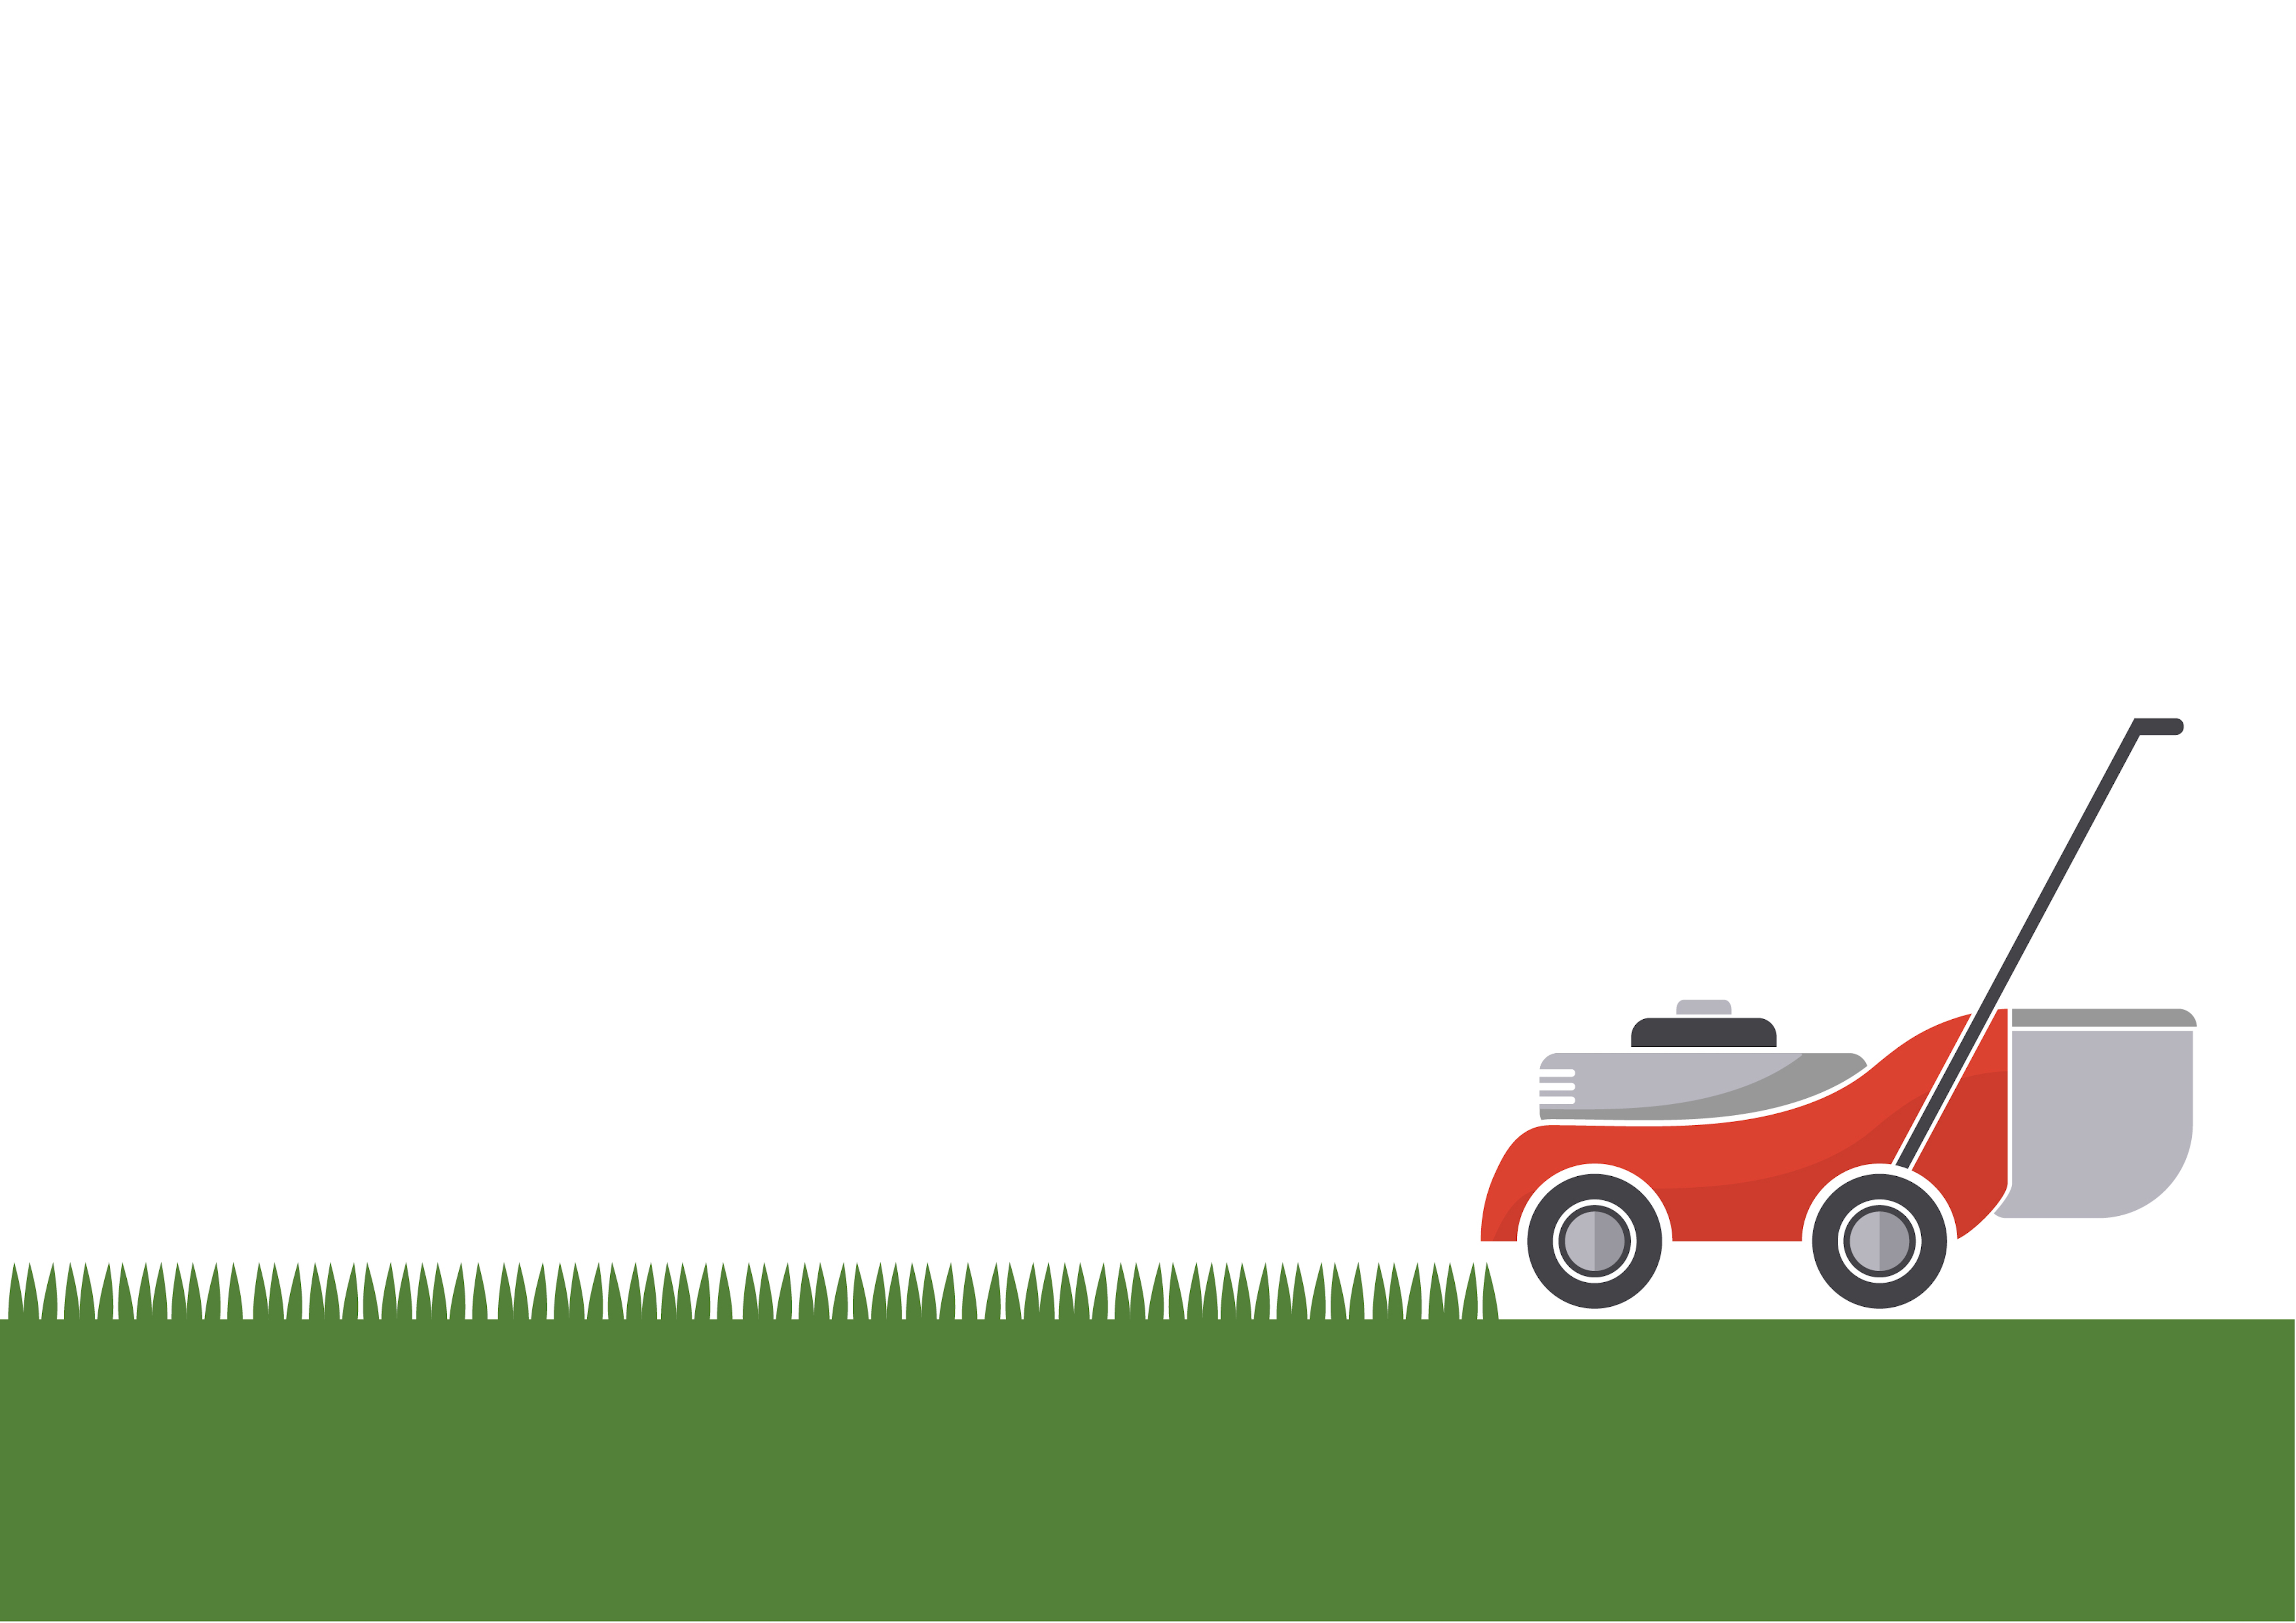 Lawn mower cutting grass with isolated background 662003 